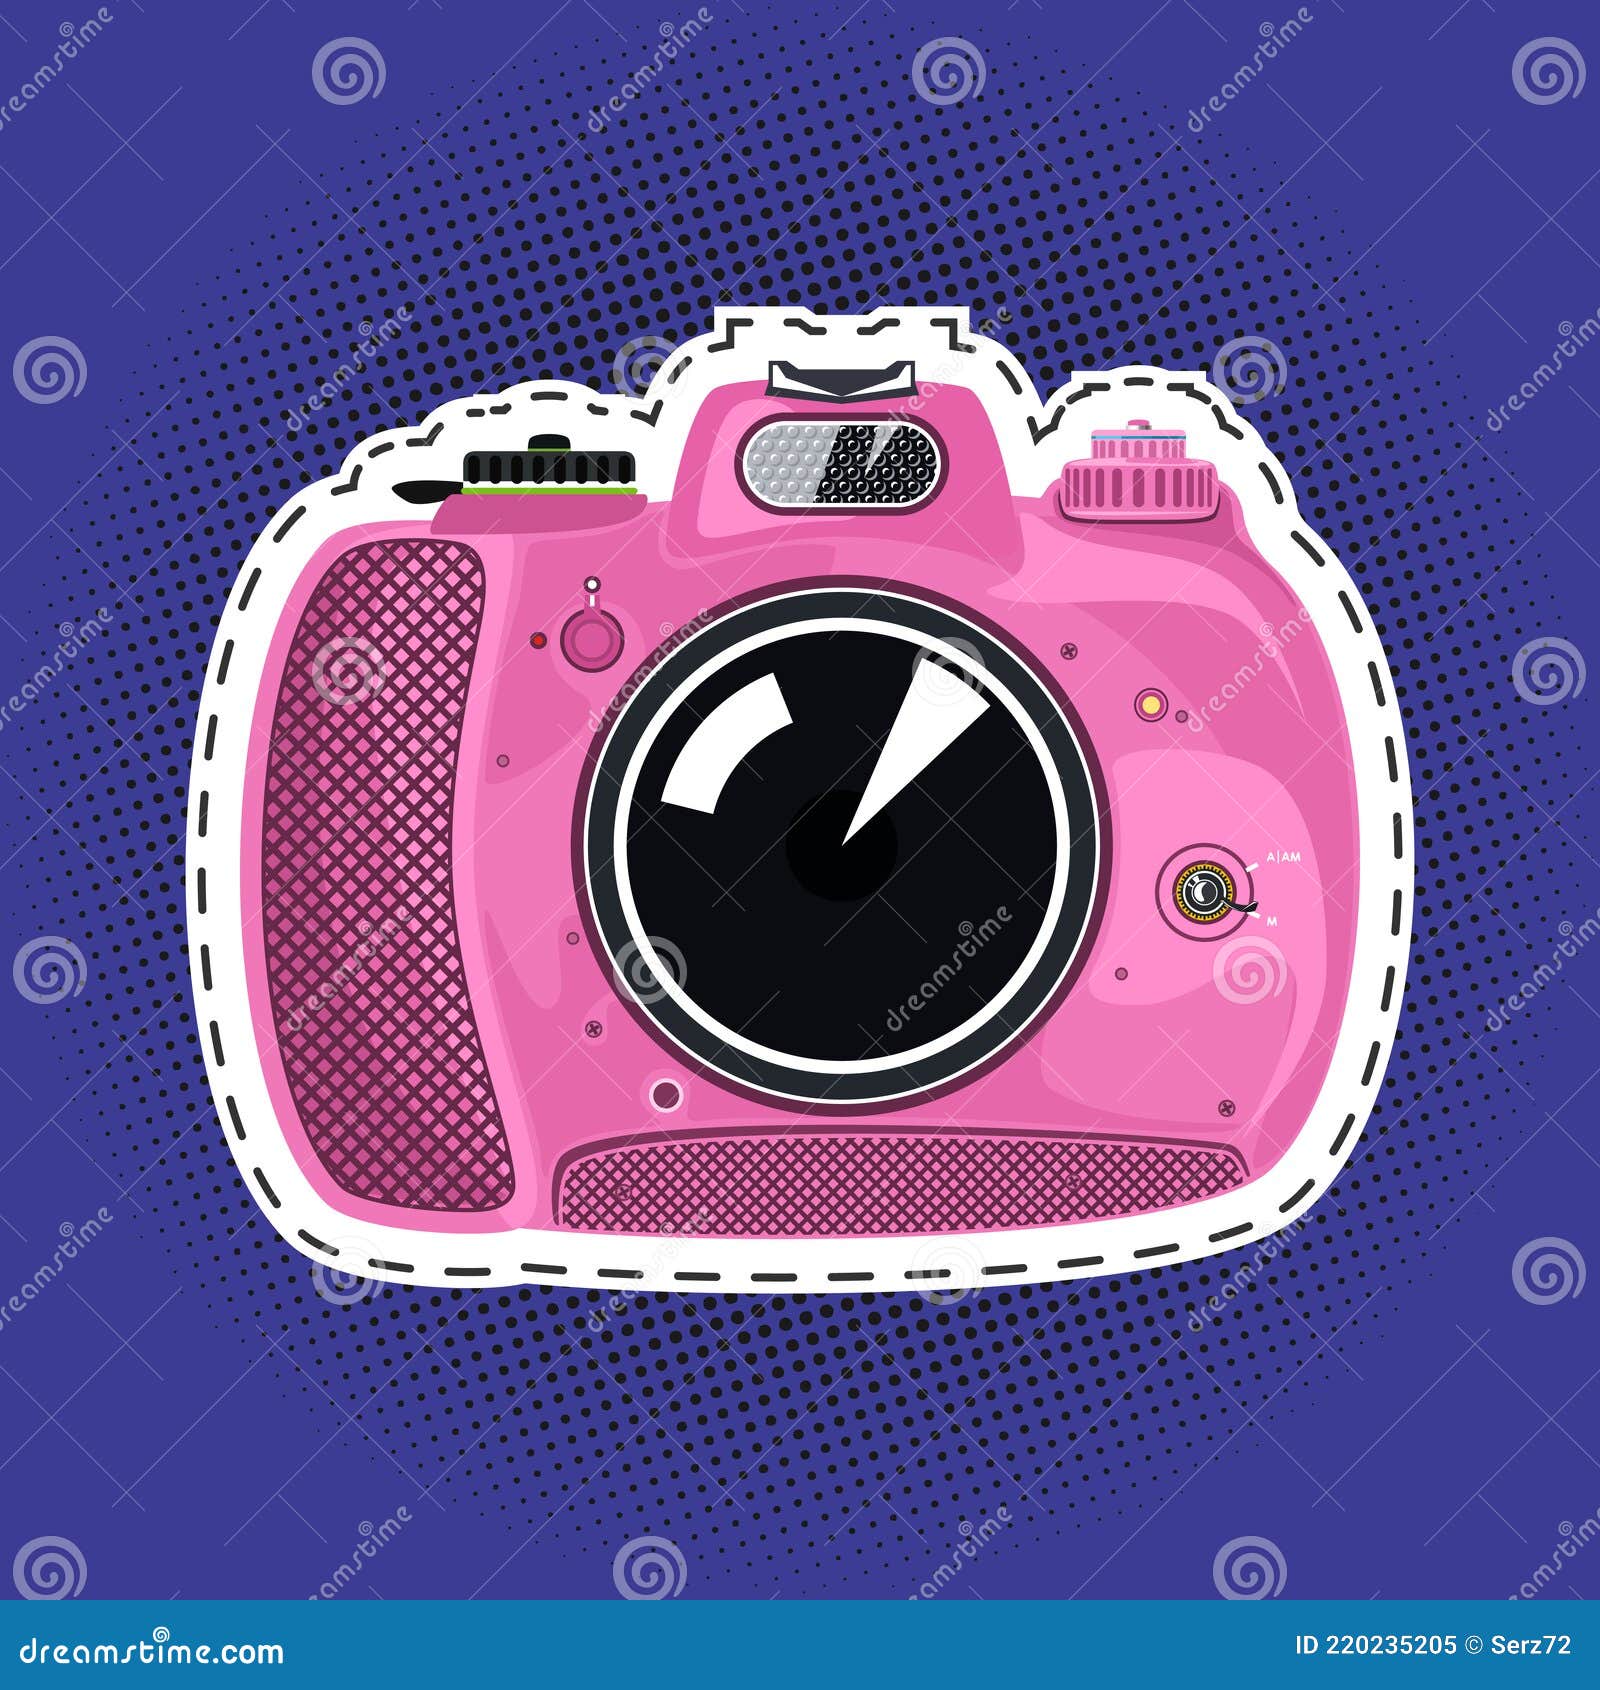 Manual Camera on a Purple Pop Art Background Stock Vector - Illustration of  compact, vector: 220235205